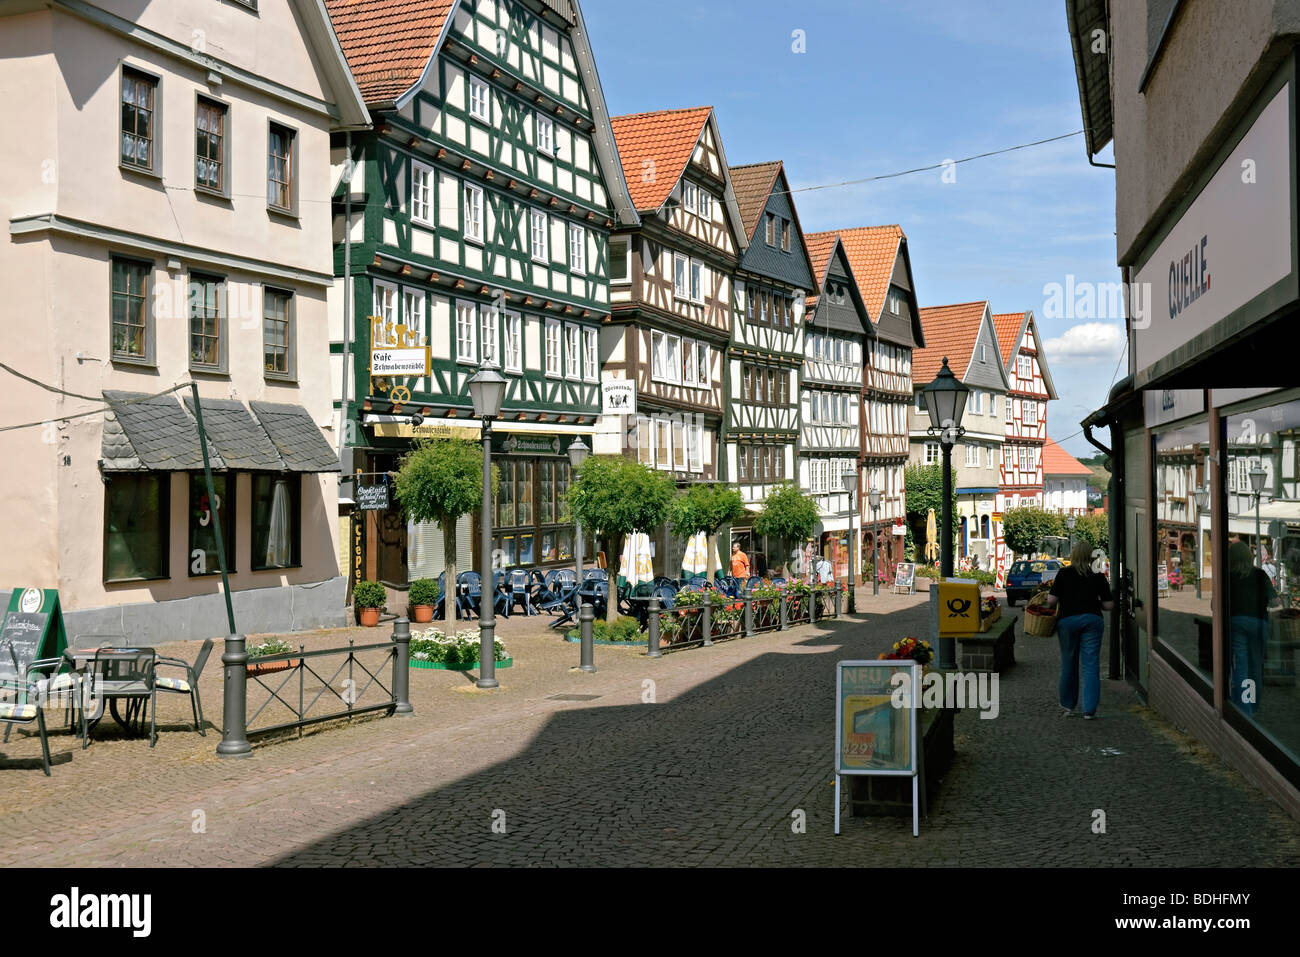 Half timbered buildings in the old part of Bad Wildungen, Hesse, Germany. Stock Photo